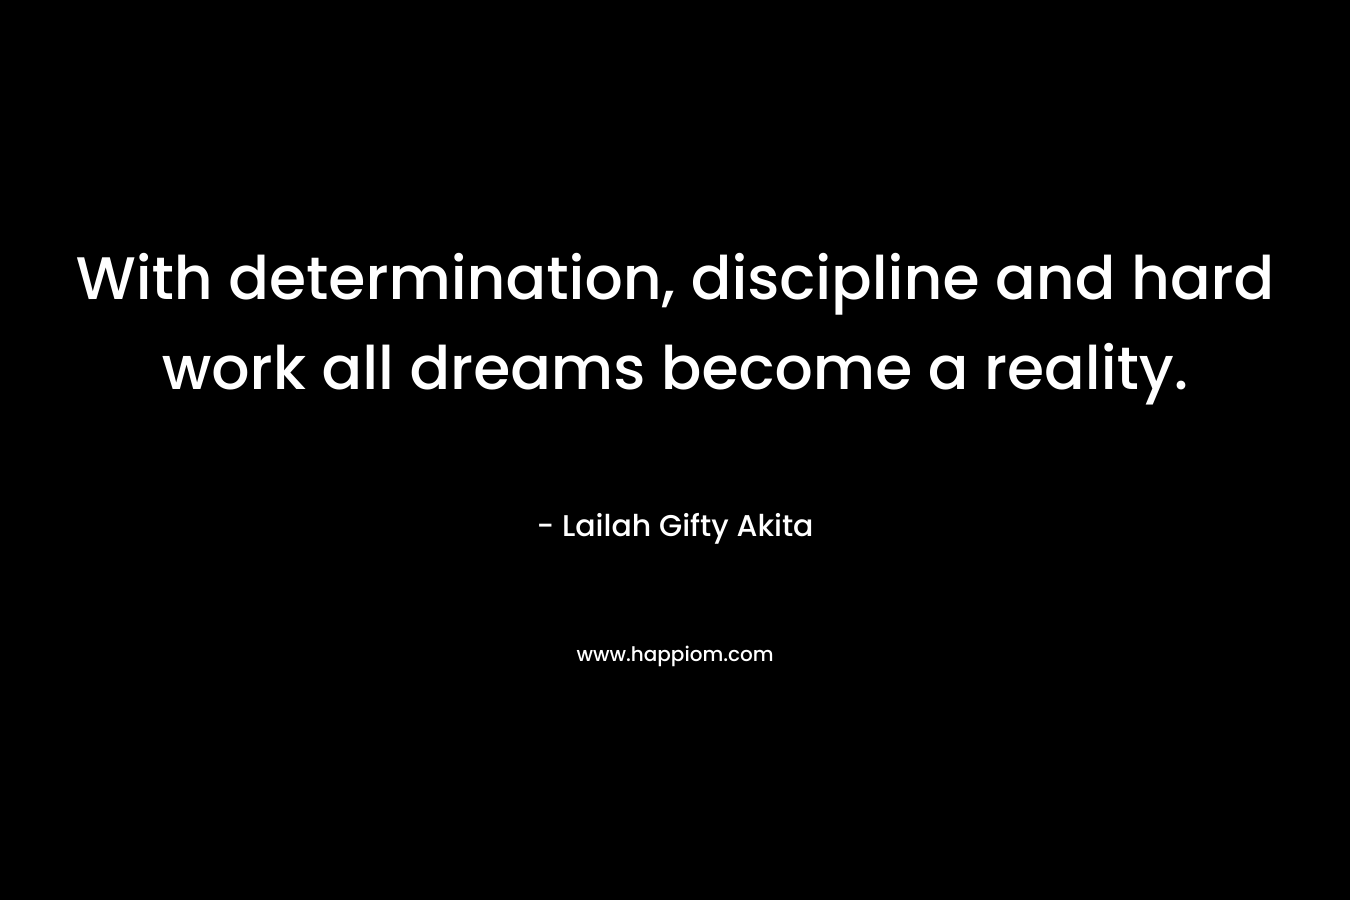 With determination, discipline and hard work all dreams become a reality.